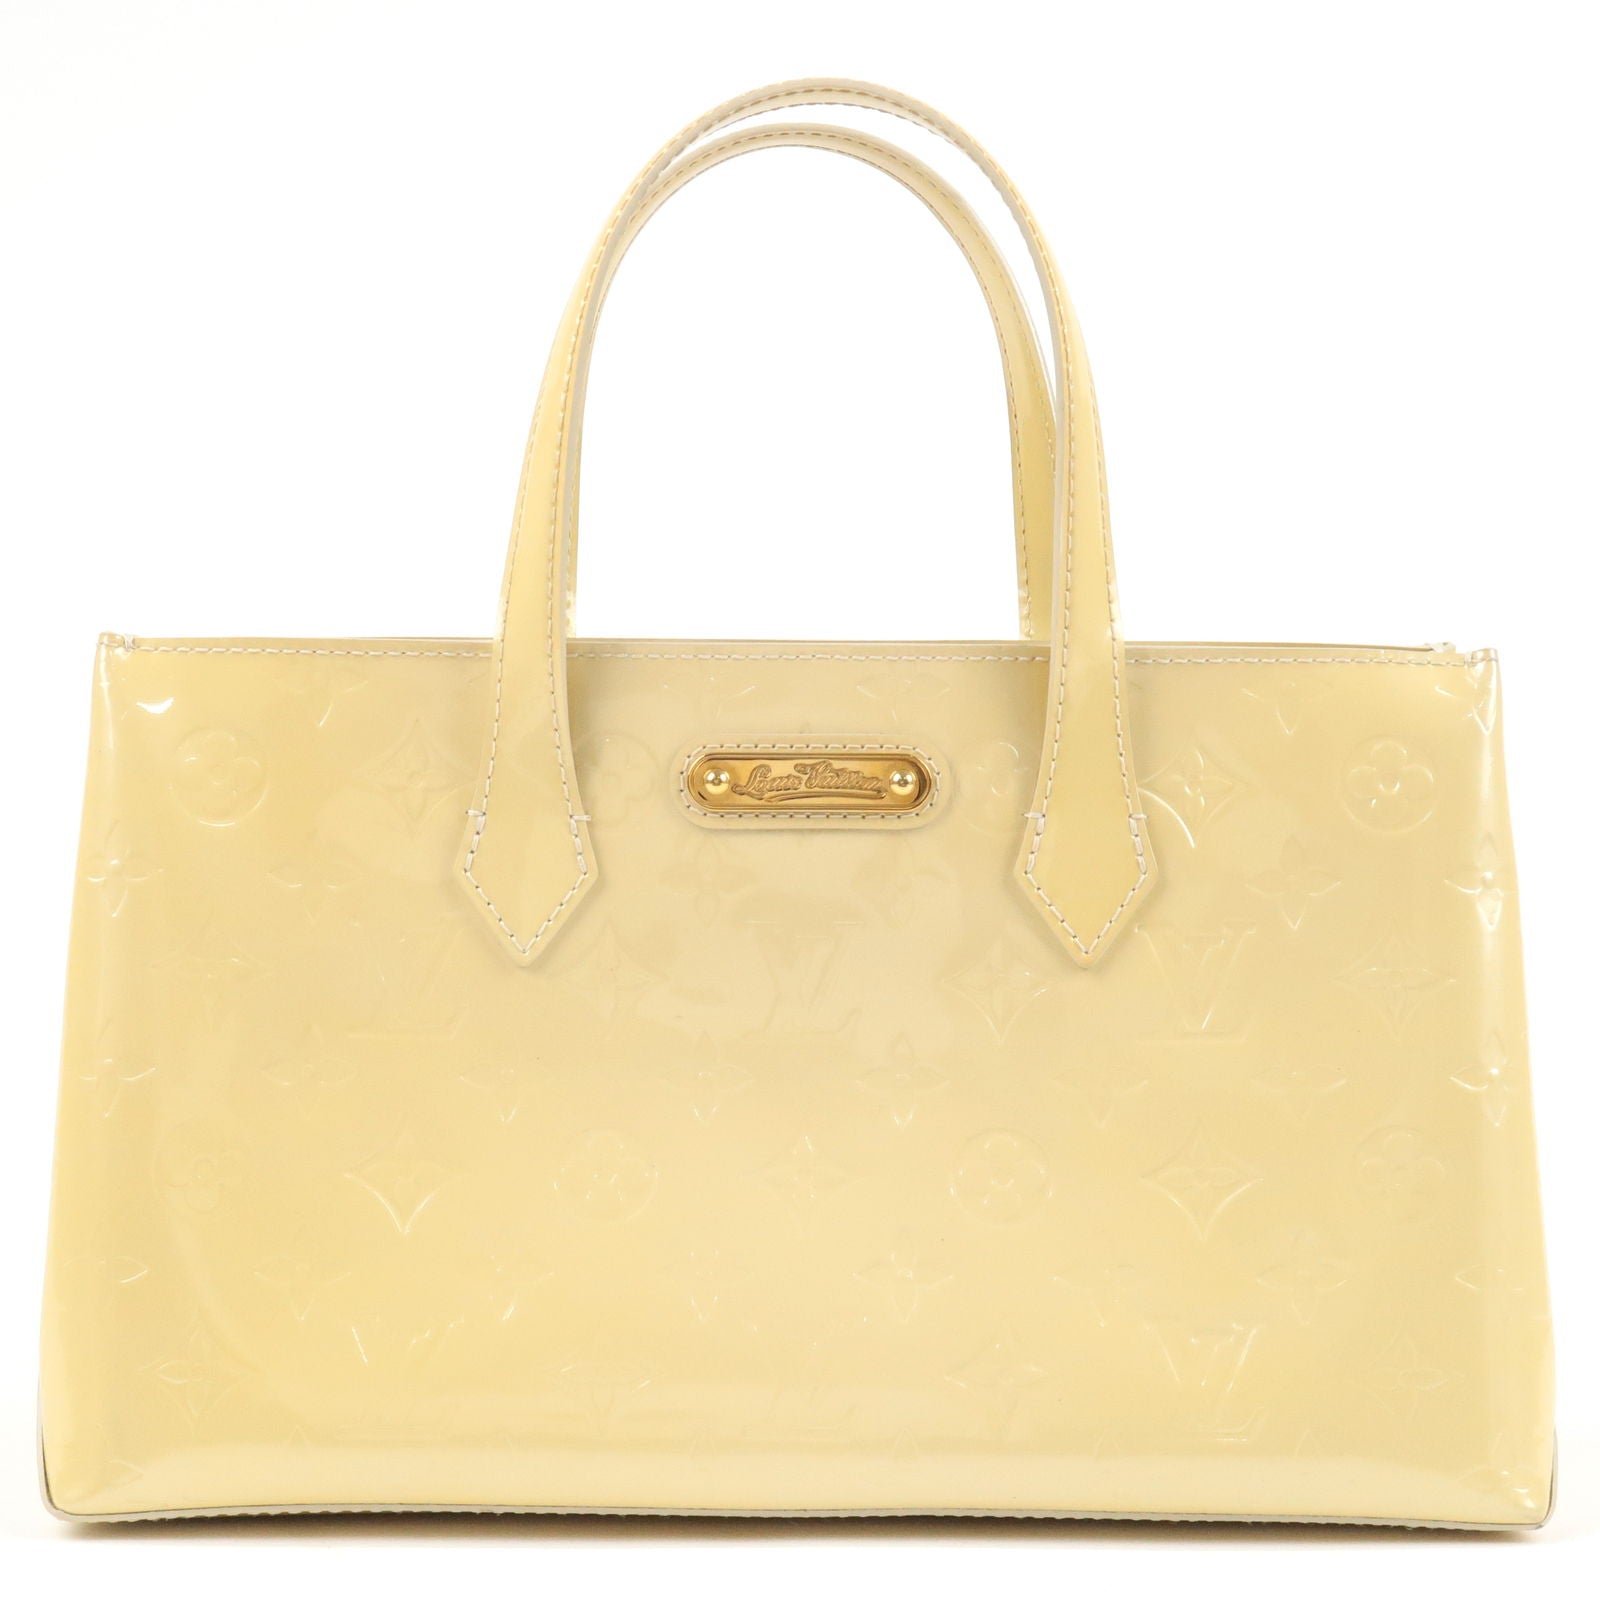 Wilshire PM Top handle bag in Monogram Vernis leather, Gold Hardware